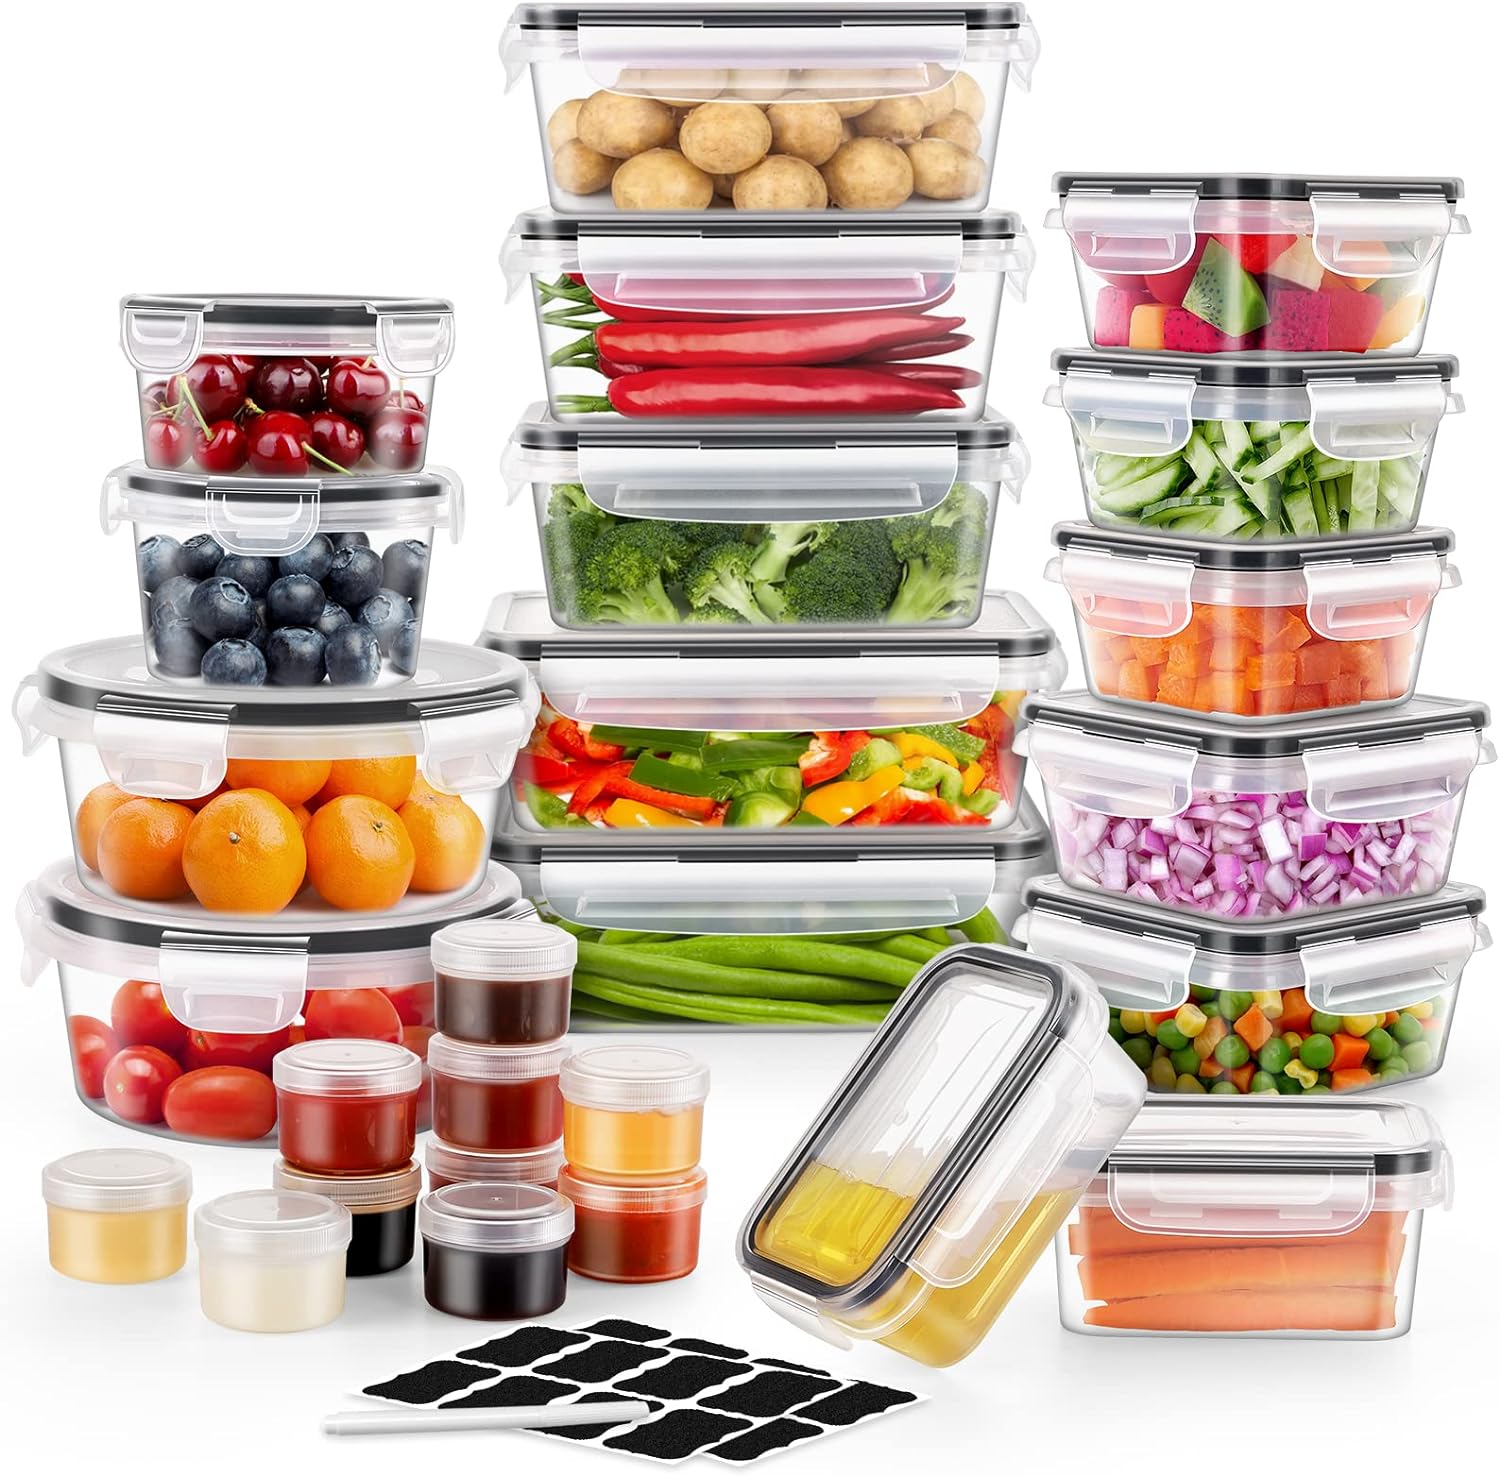 ME.FAN 52 PCS Food Storage Containers with Lids, Airtight Food Containers for Kitchen Storage Organization(26 Containers + 26 Lids) Meal Prep containers with Labels  Marker